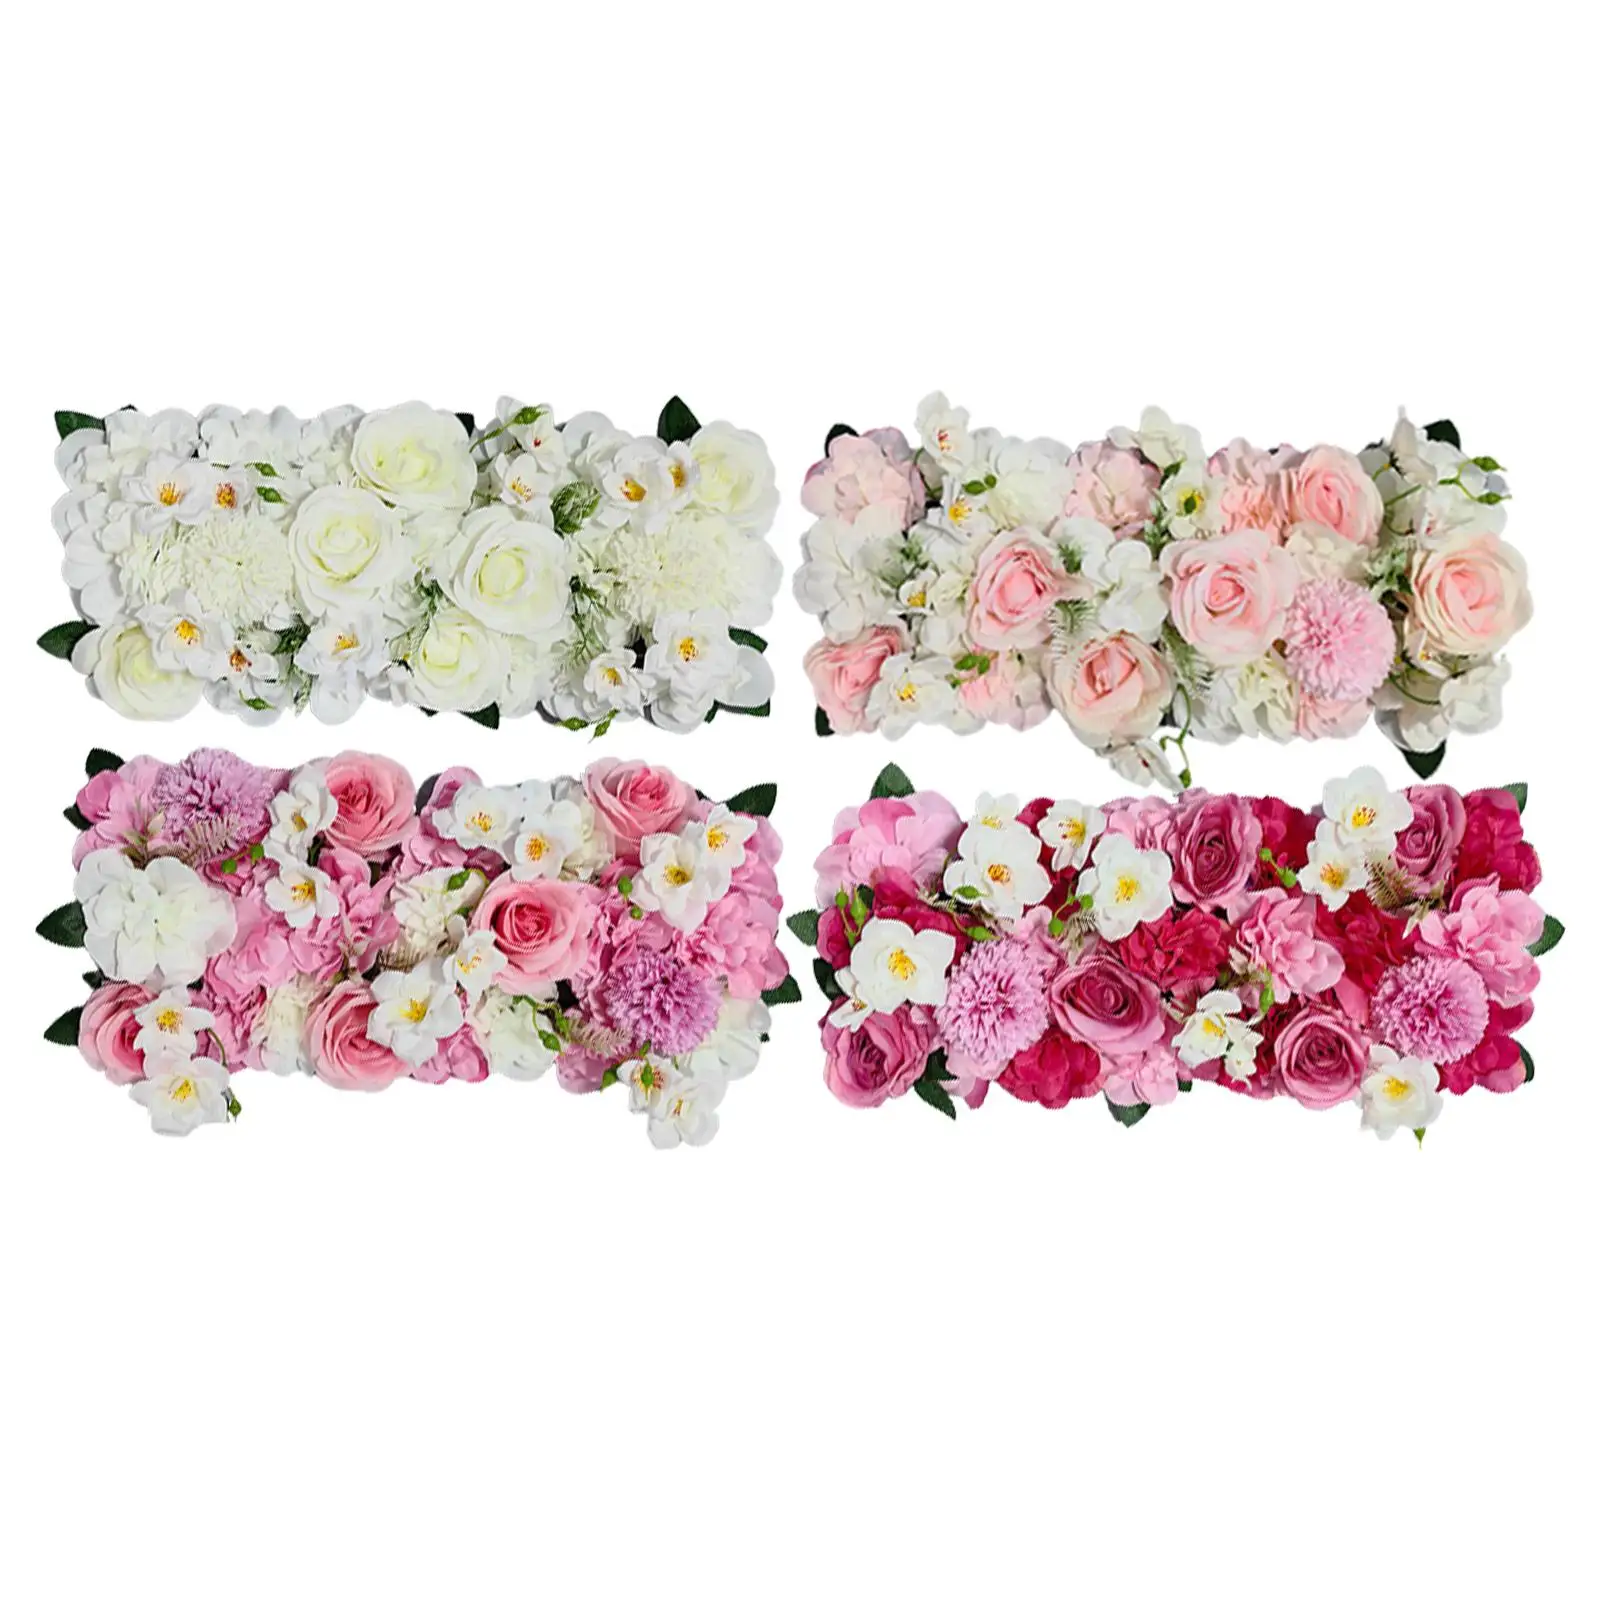 Arched Door Flower Row Decoration Silk Cloth Rose Photo Props Wedding Road Cited